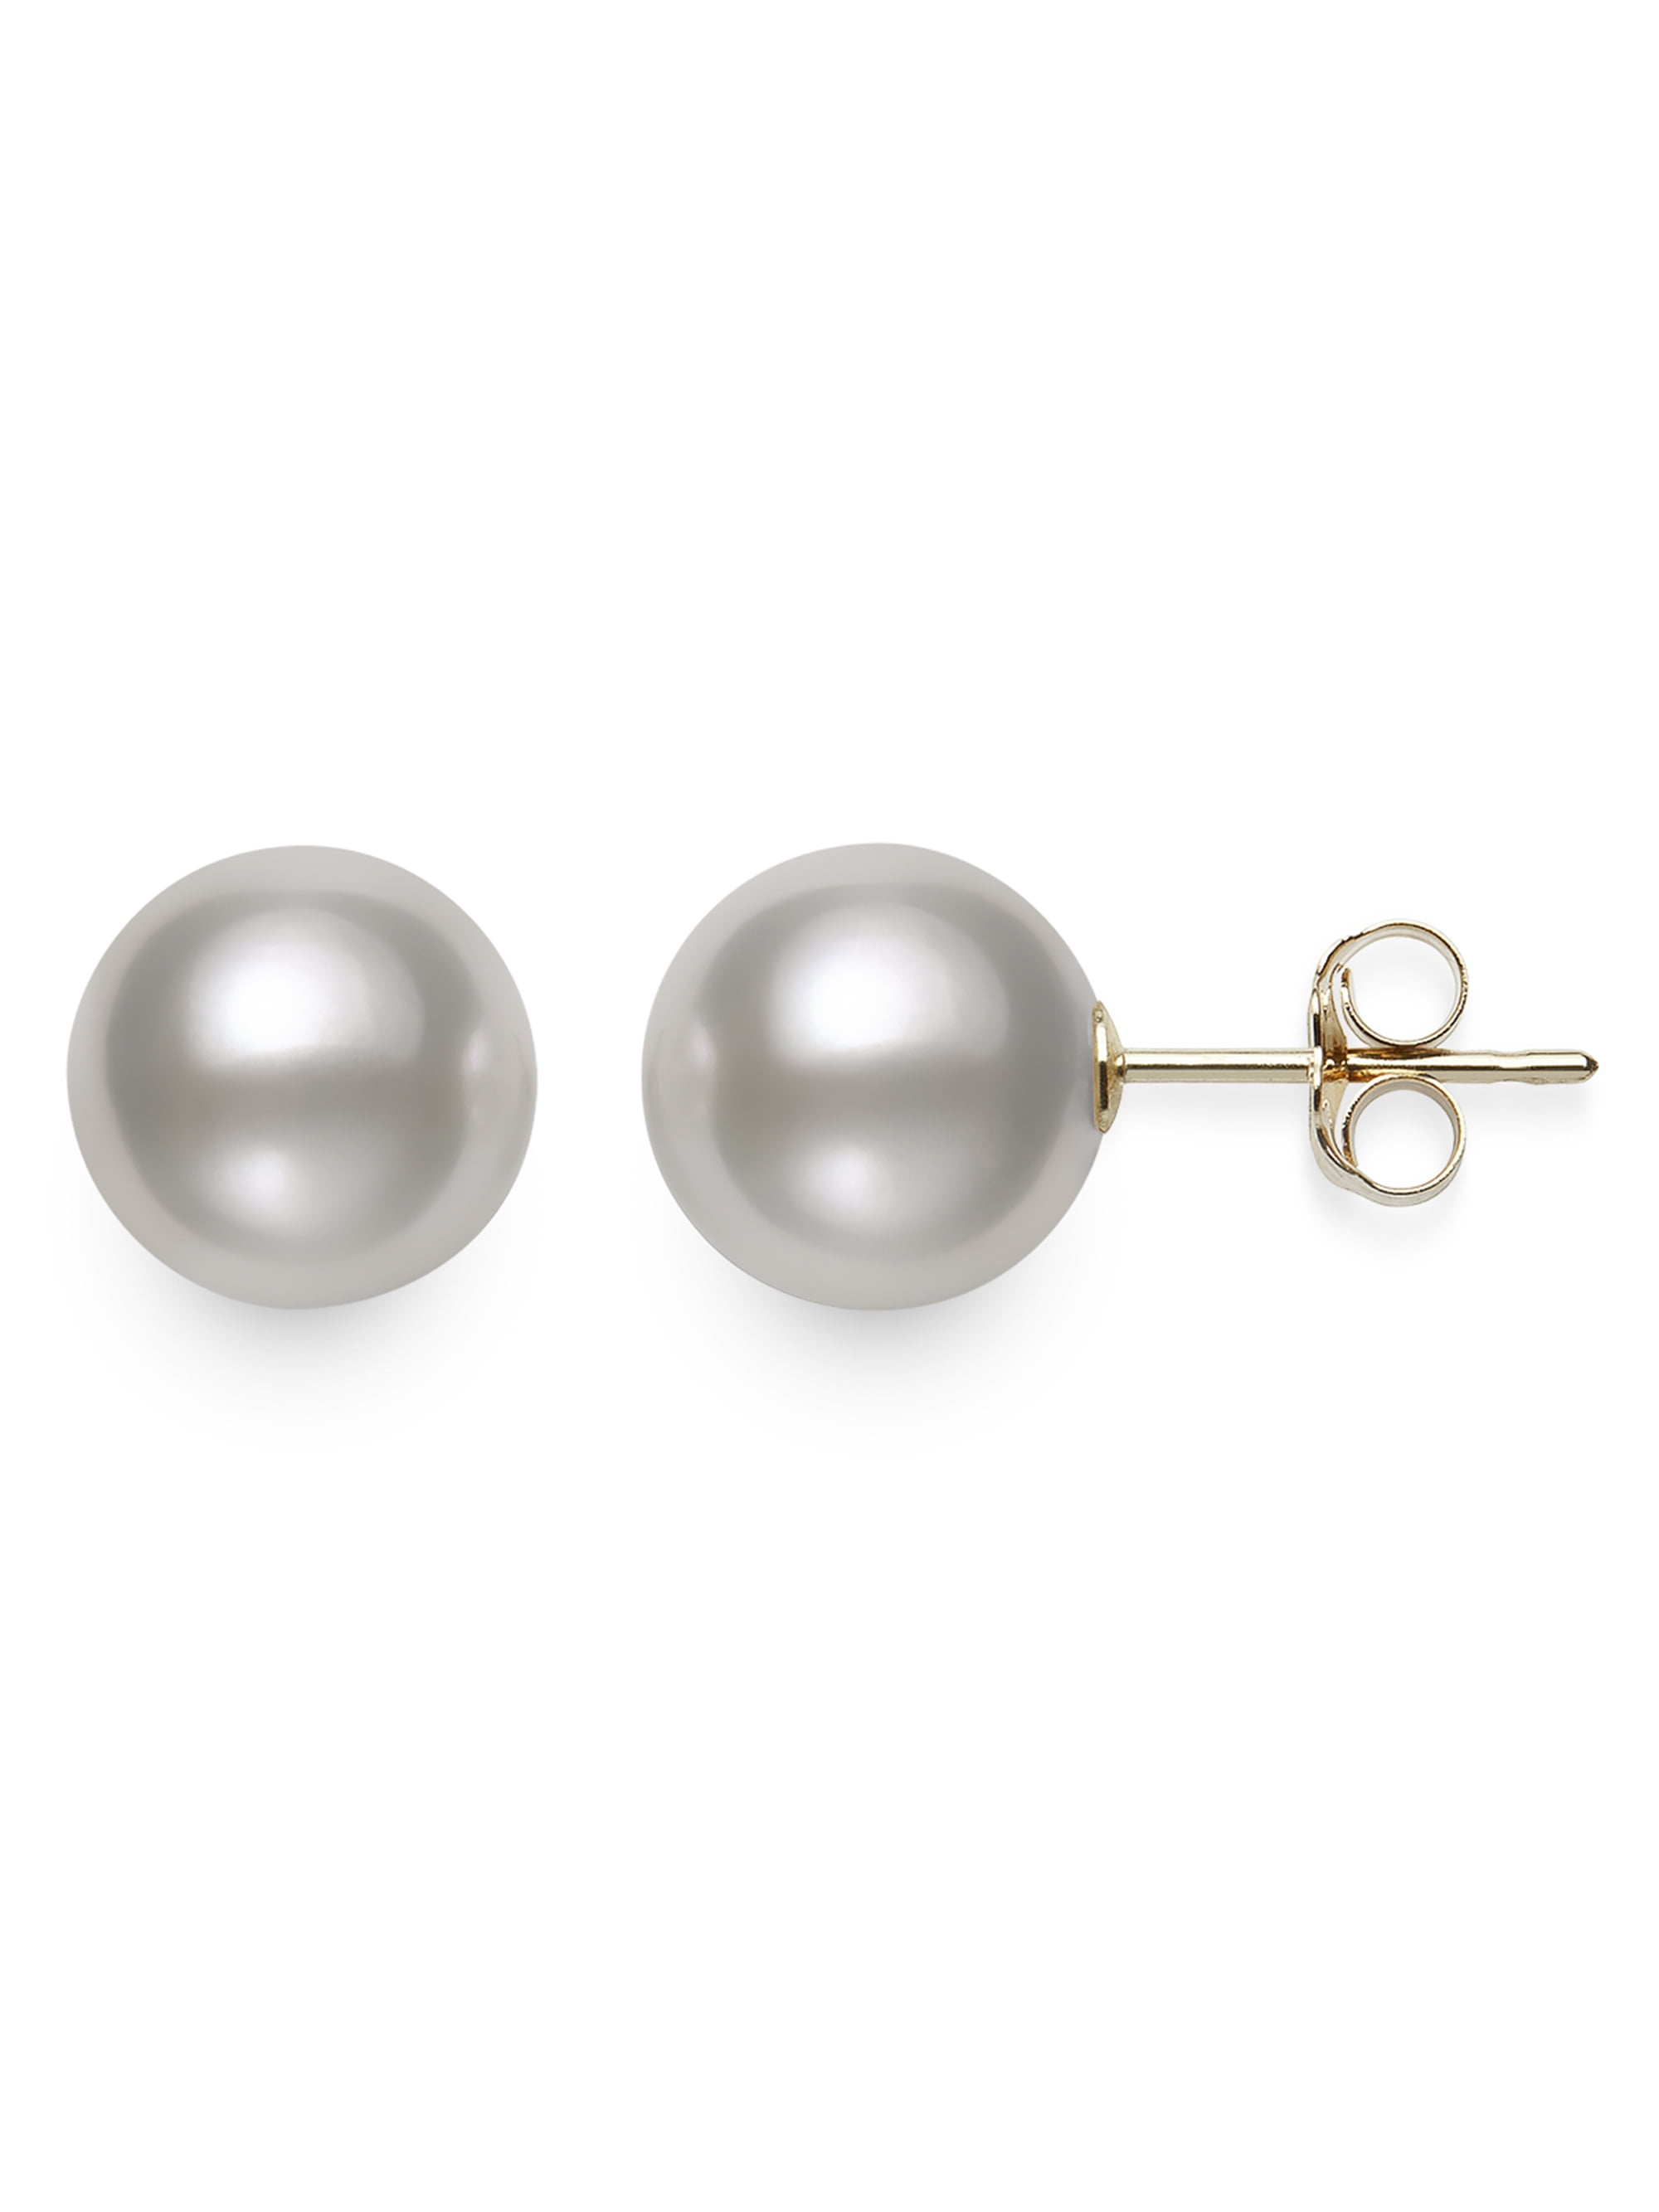 New AAA 10-12mm South Sea Pink  Pearl Earrings 14K YELLOW GOLD 